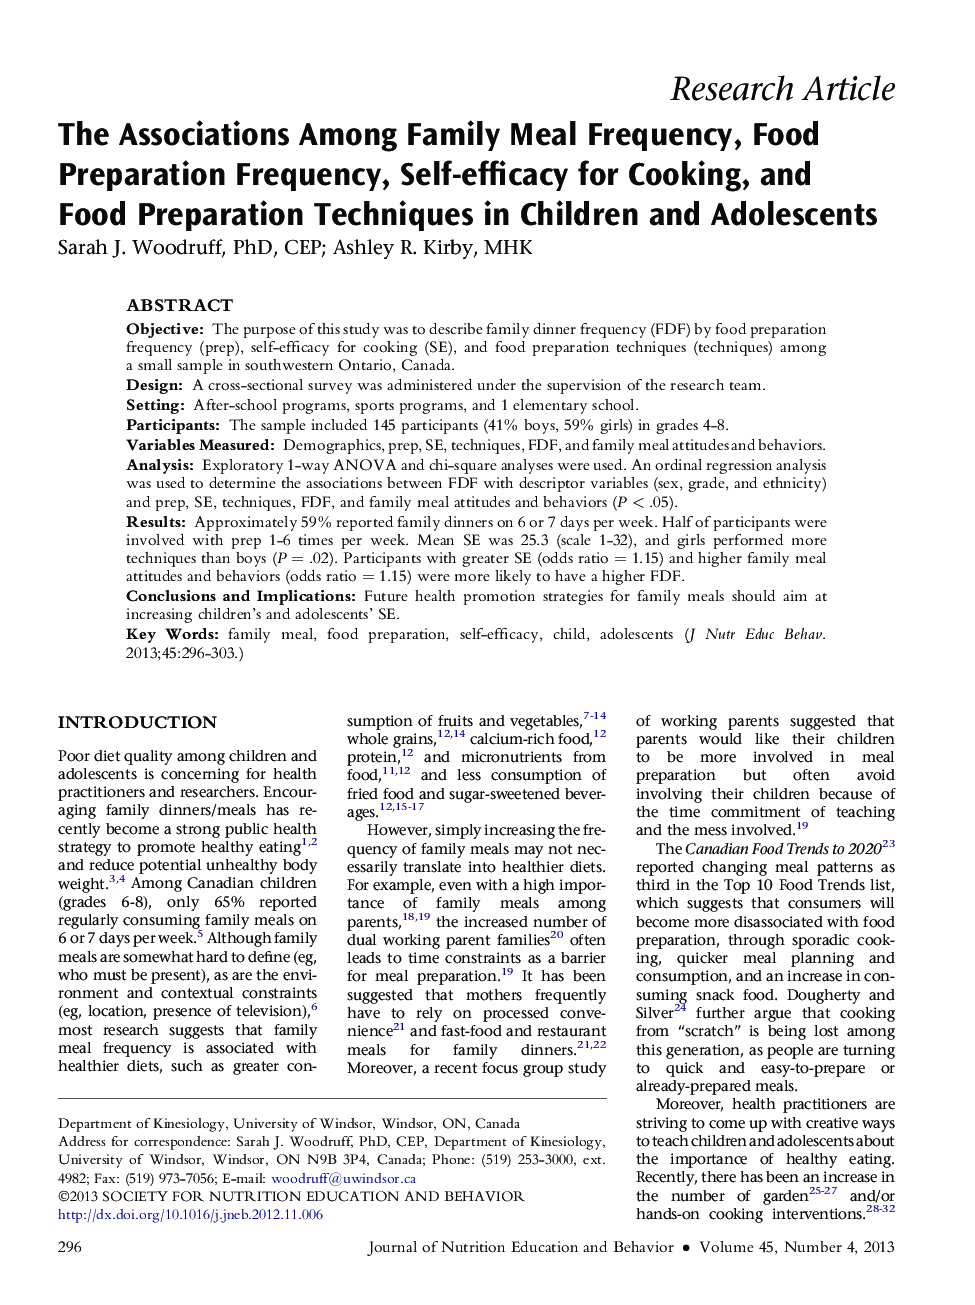 The Associations Among Family Meal Frequency, Food Preparation Frequency, Self-efficacy for Cooking, and Food Preparation Techniques in Children and Adolescents